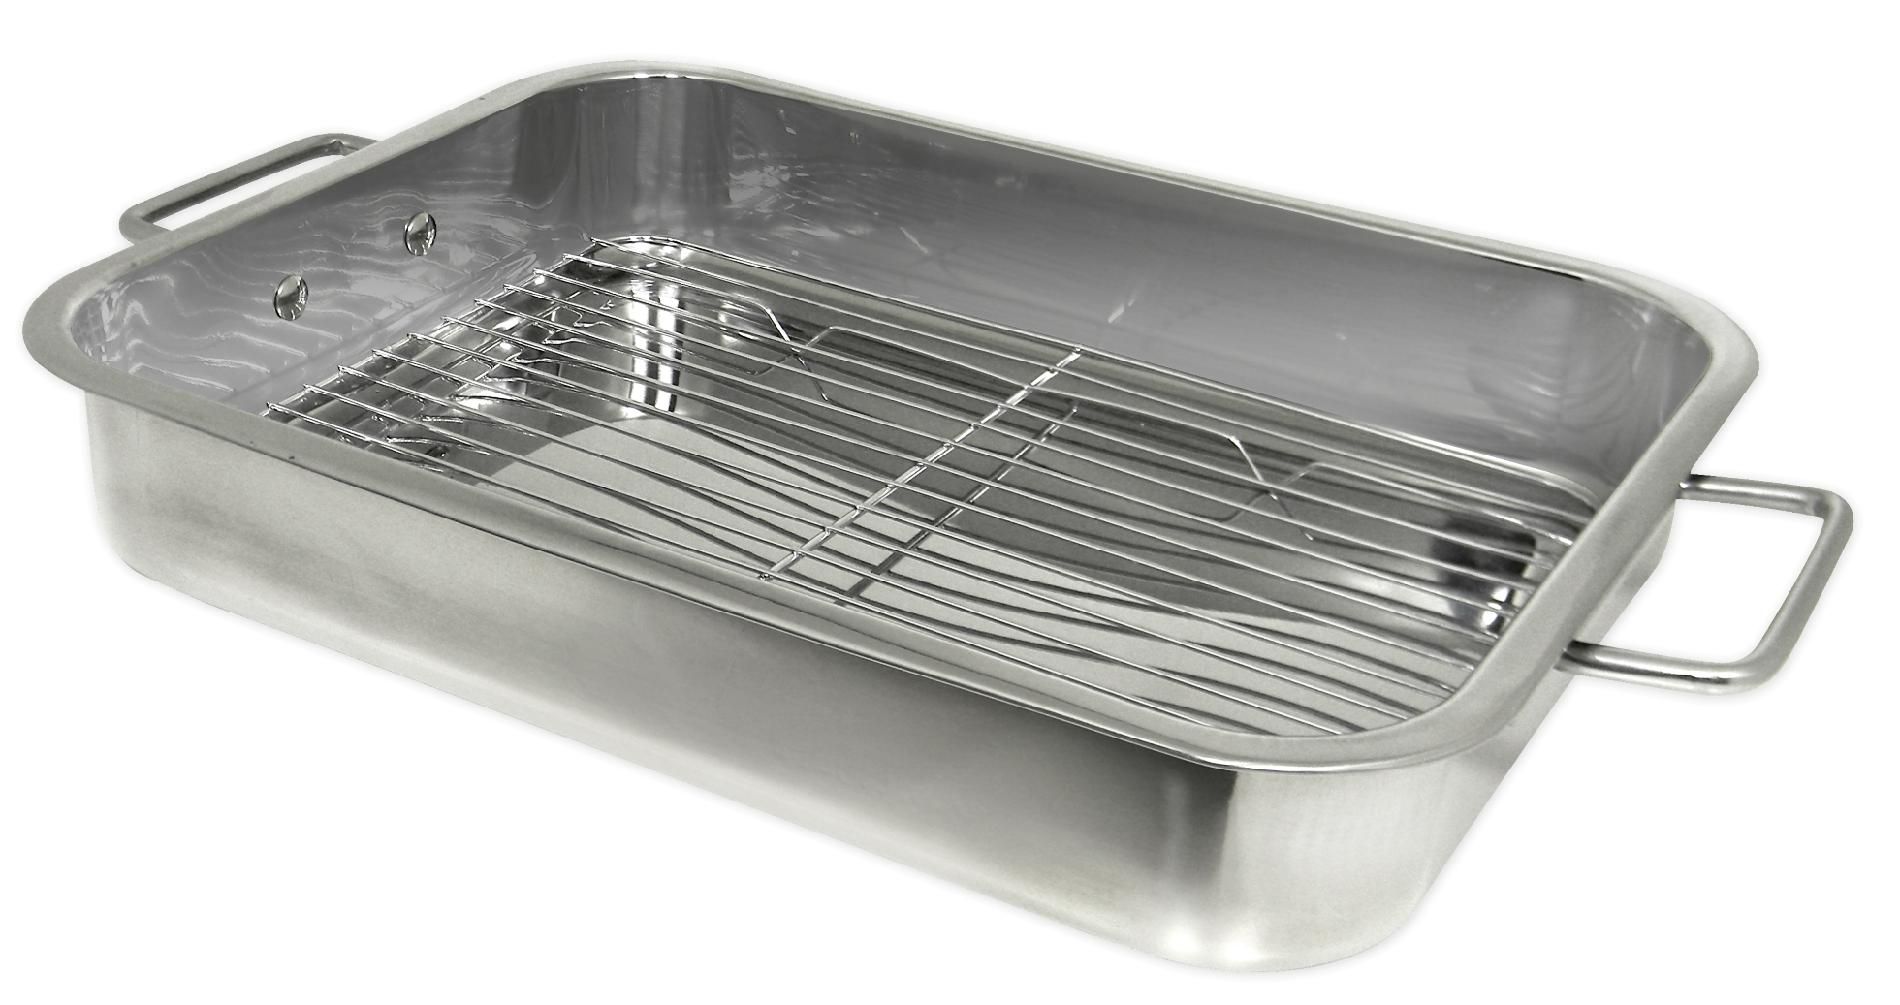 Prime Pacific Stainless Steel Heavy Duty Pan